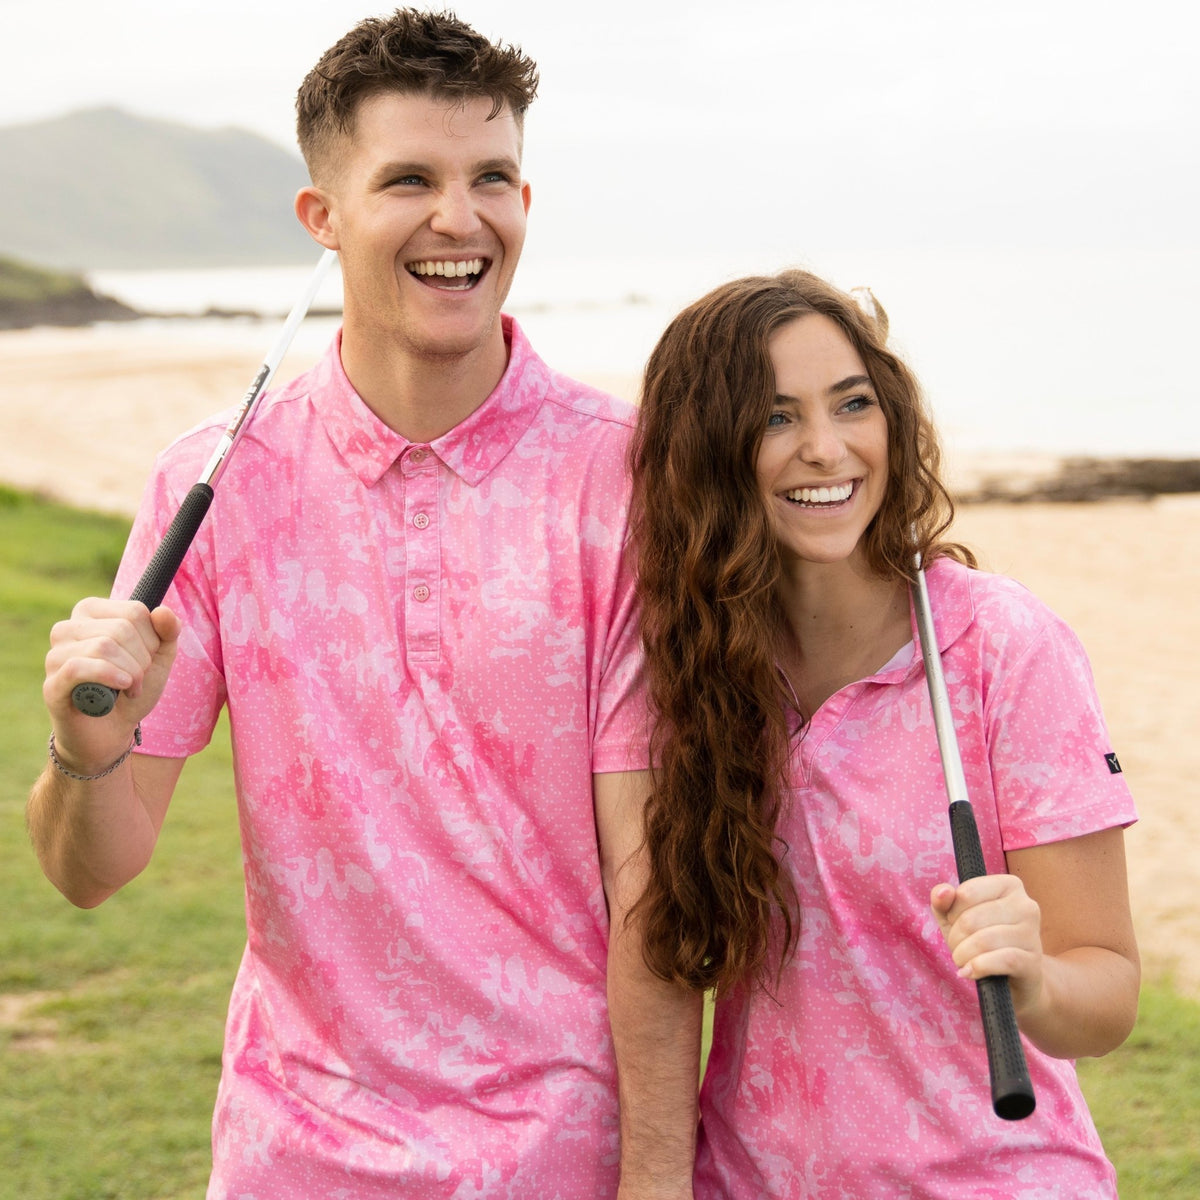 Pink Golf Shirts. Seriously Fantastic Pink Golf Polos. Only $39.95